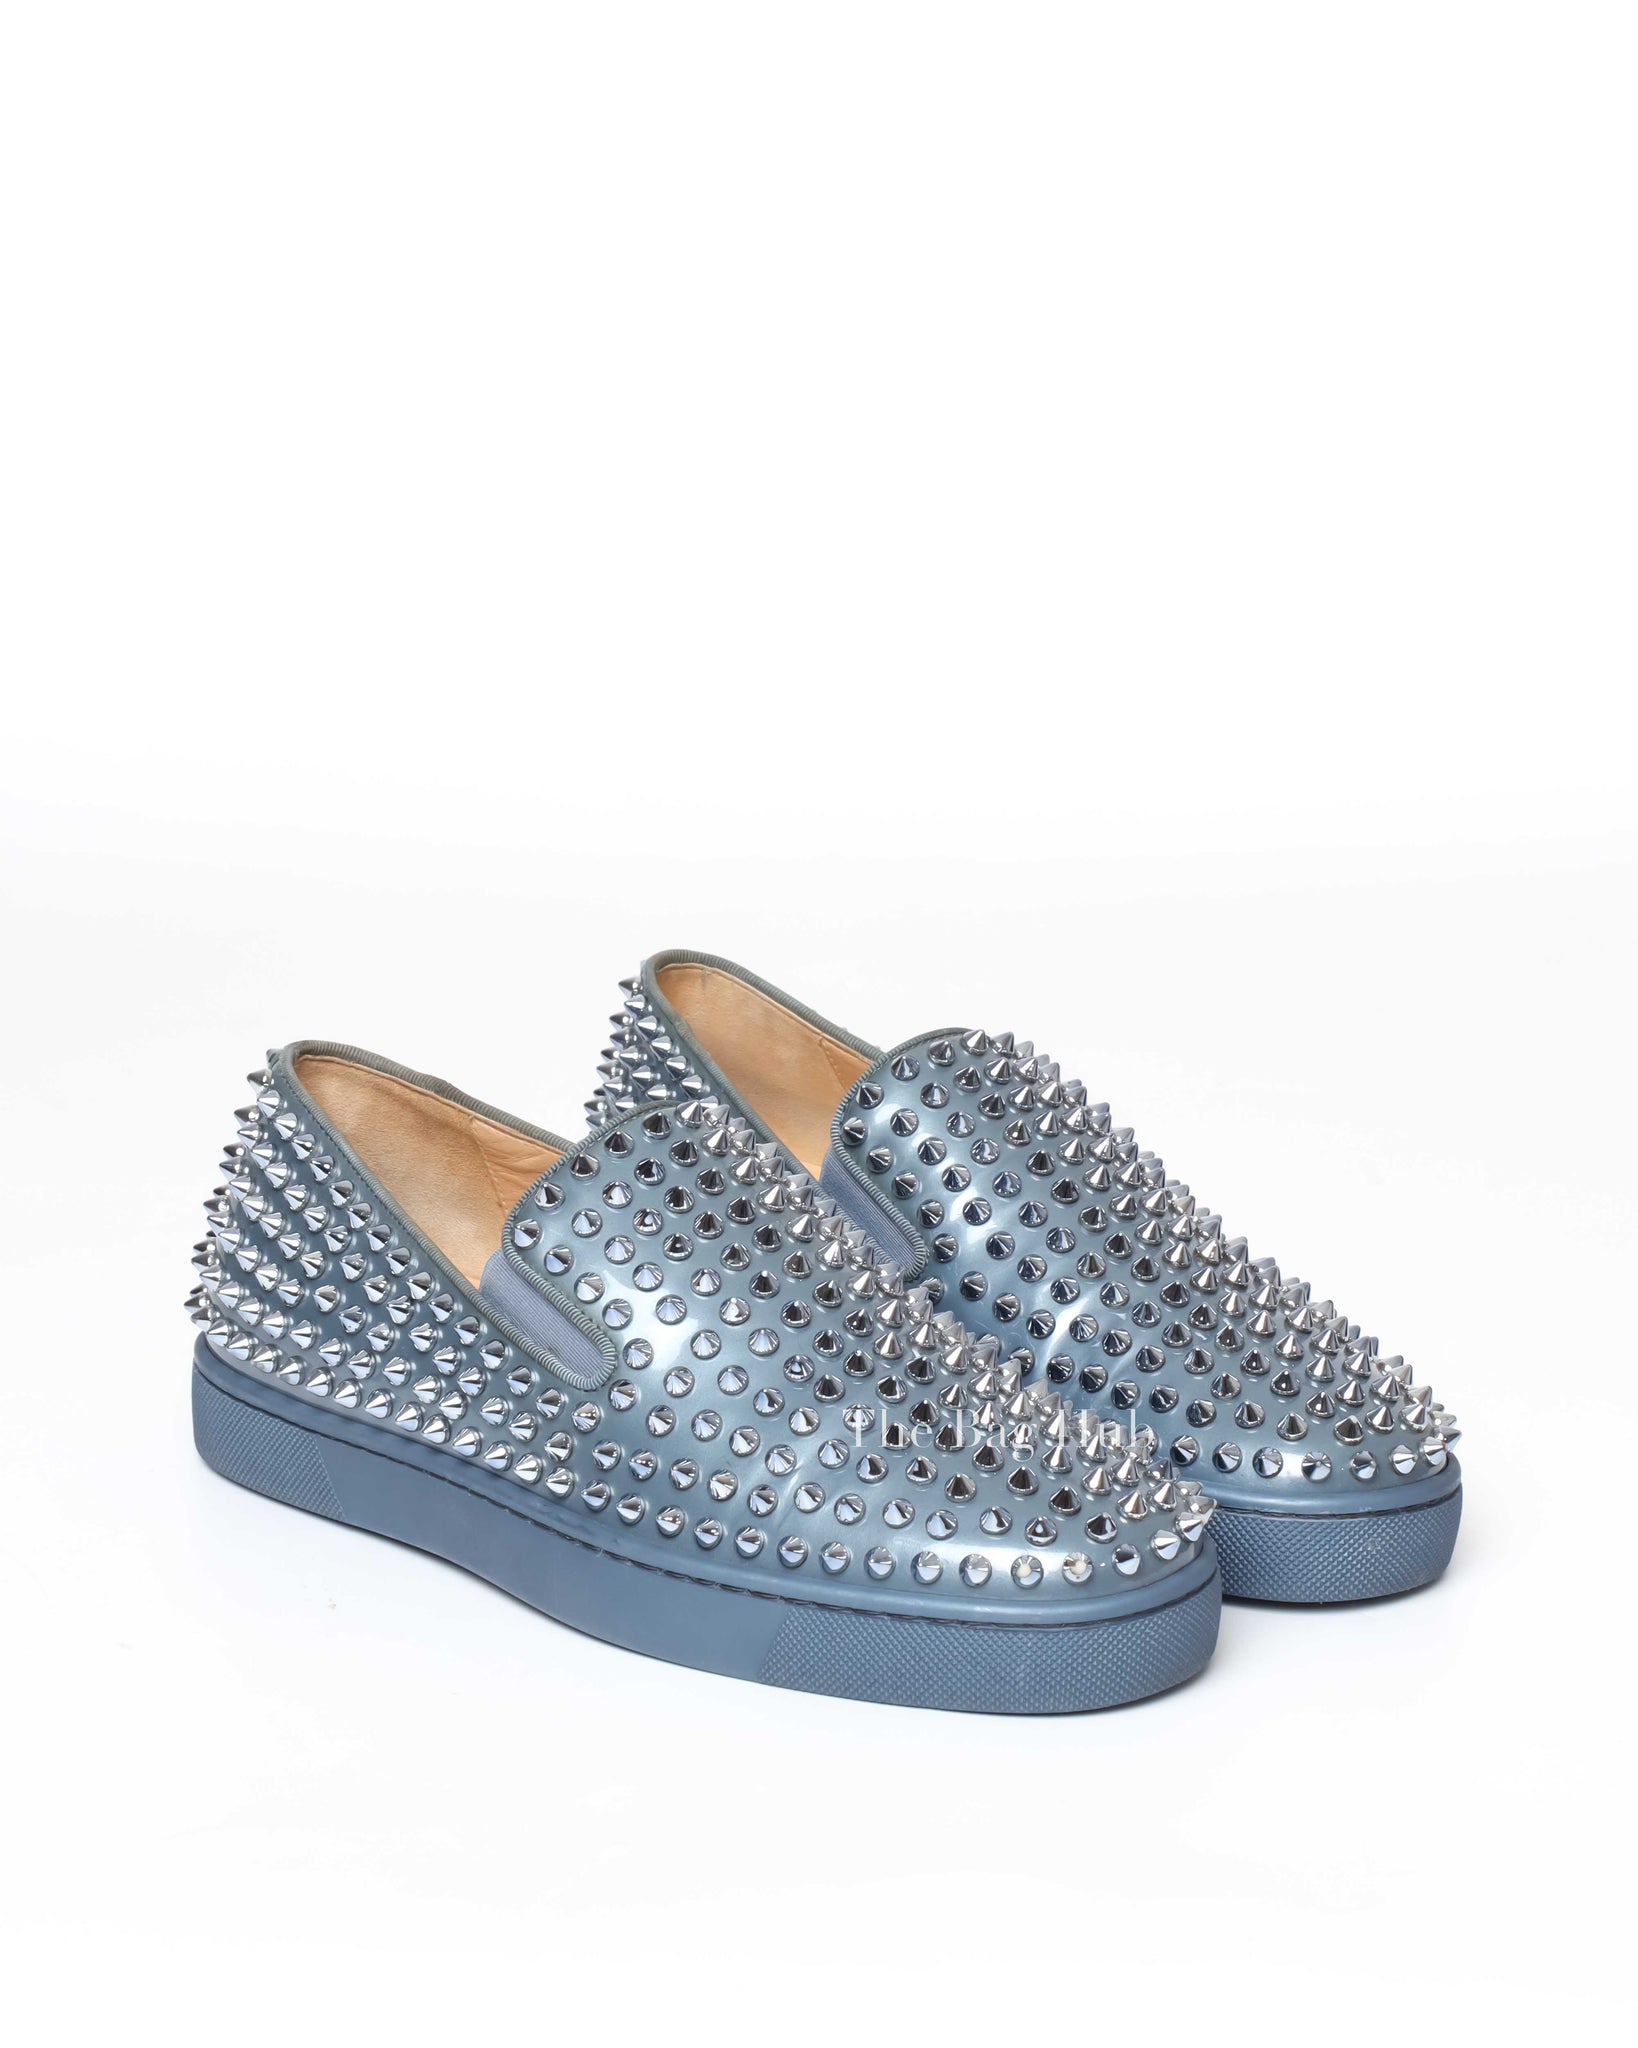 Christian Louboutin Bluish Silver Patent Roller Boat Spike Slip-On Sneakers Size 40-2